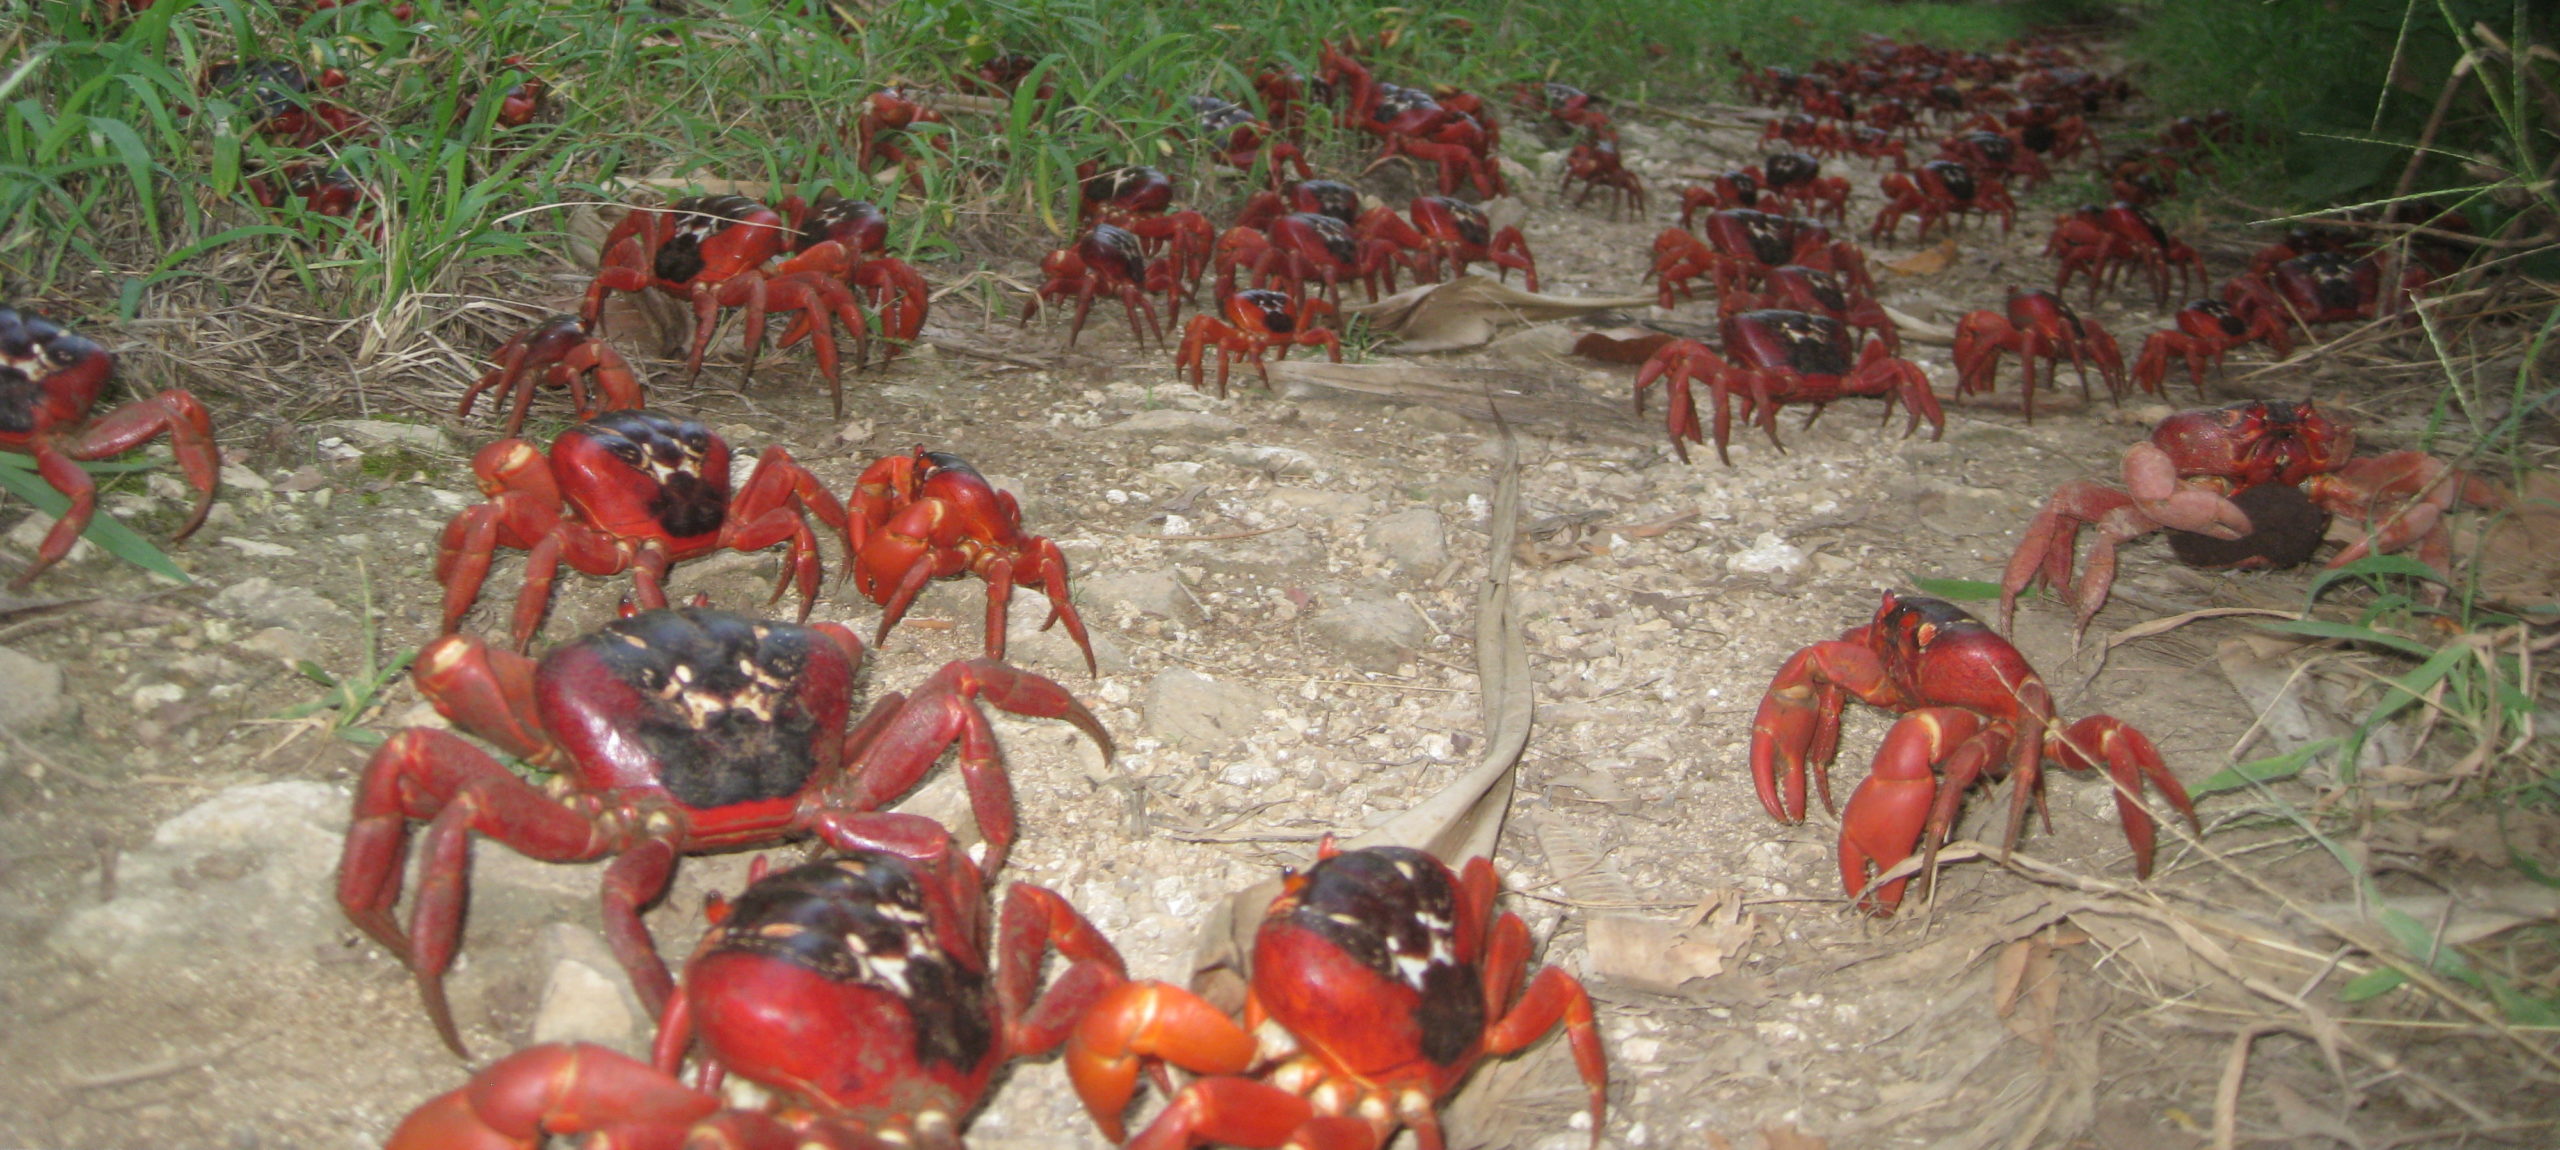 Christmas Island’s Millions Of Migrating Baby Crabs Are A Bonkers Sight To Behold